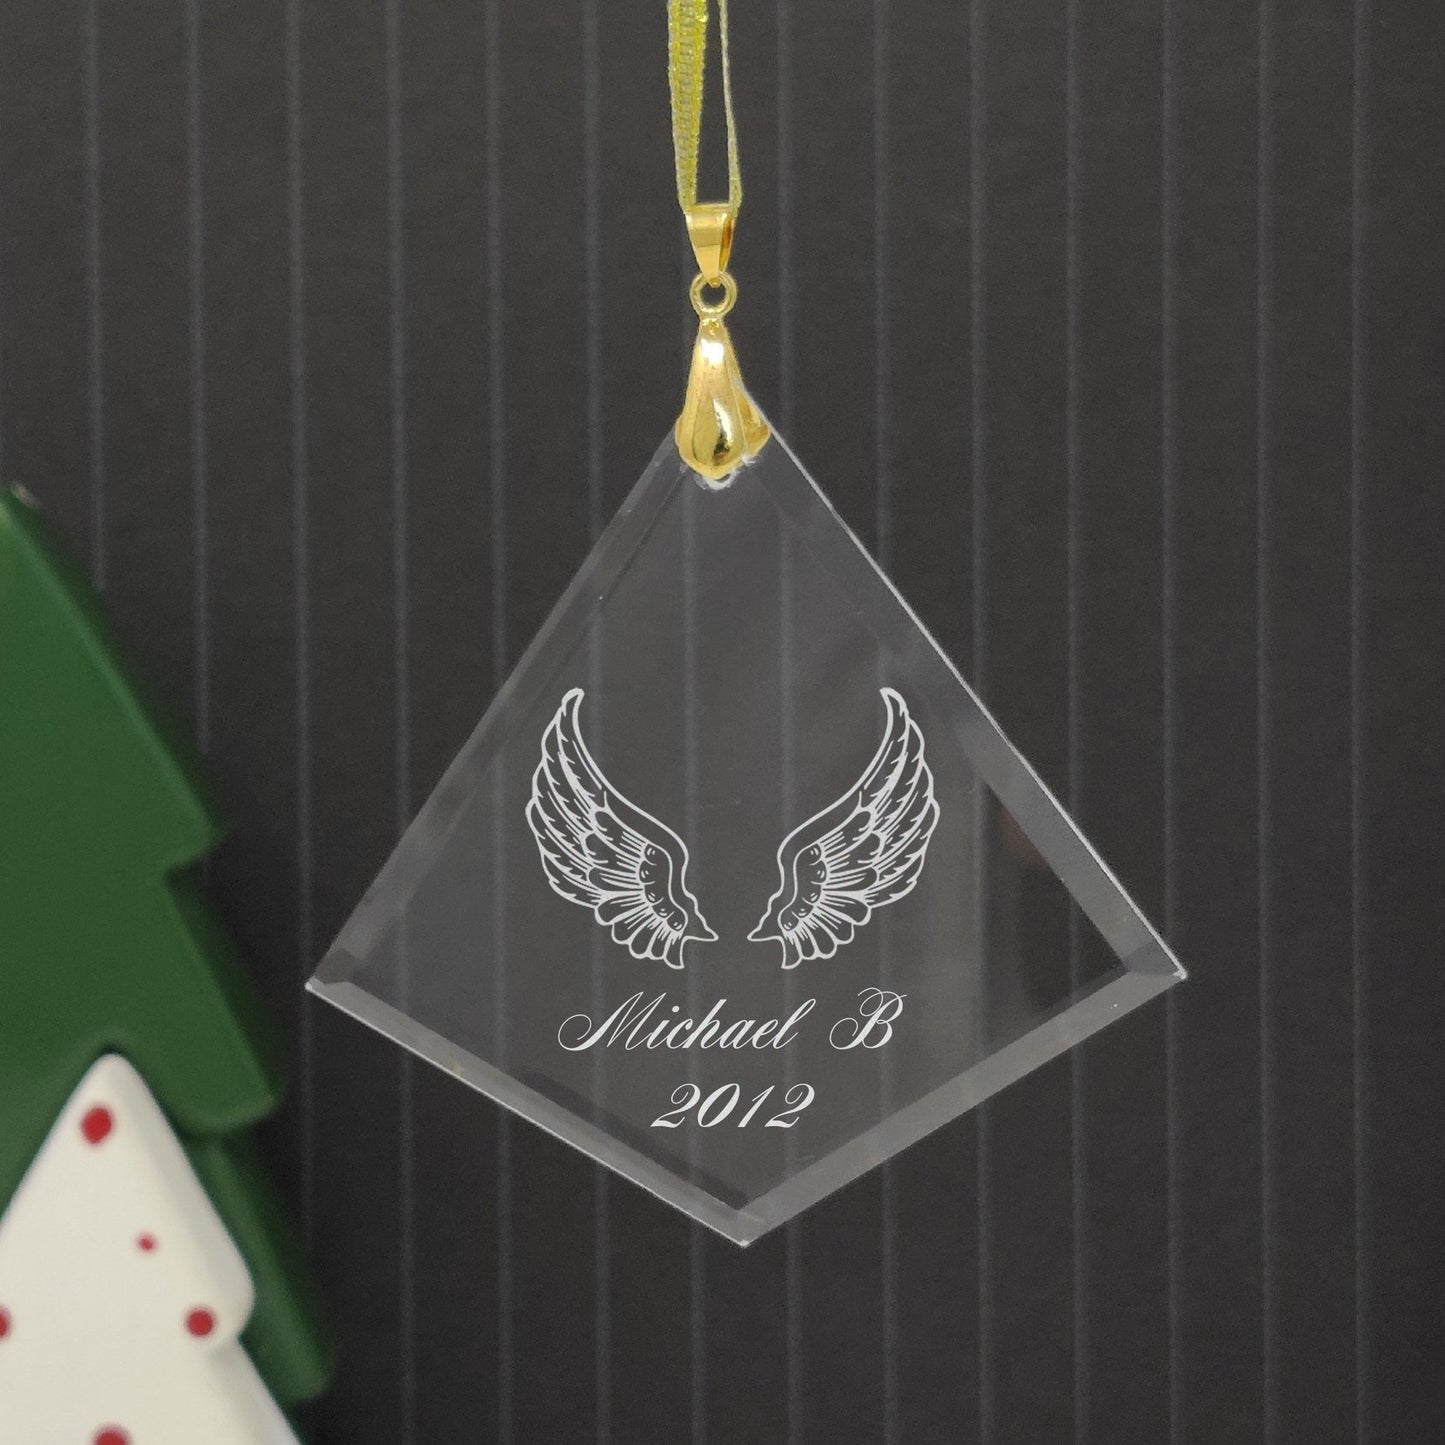 LaserGram Christmas Ornament, Grad Cap Class of 2020, Personalized Engraving Included (Diamond Shape)